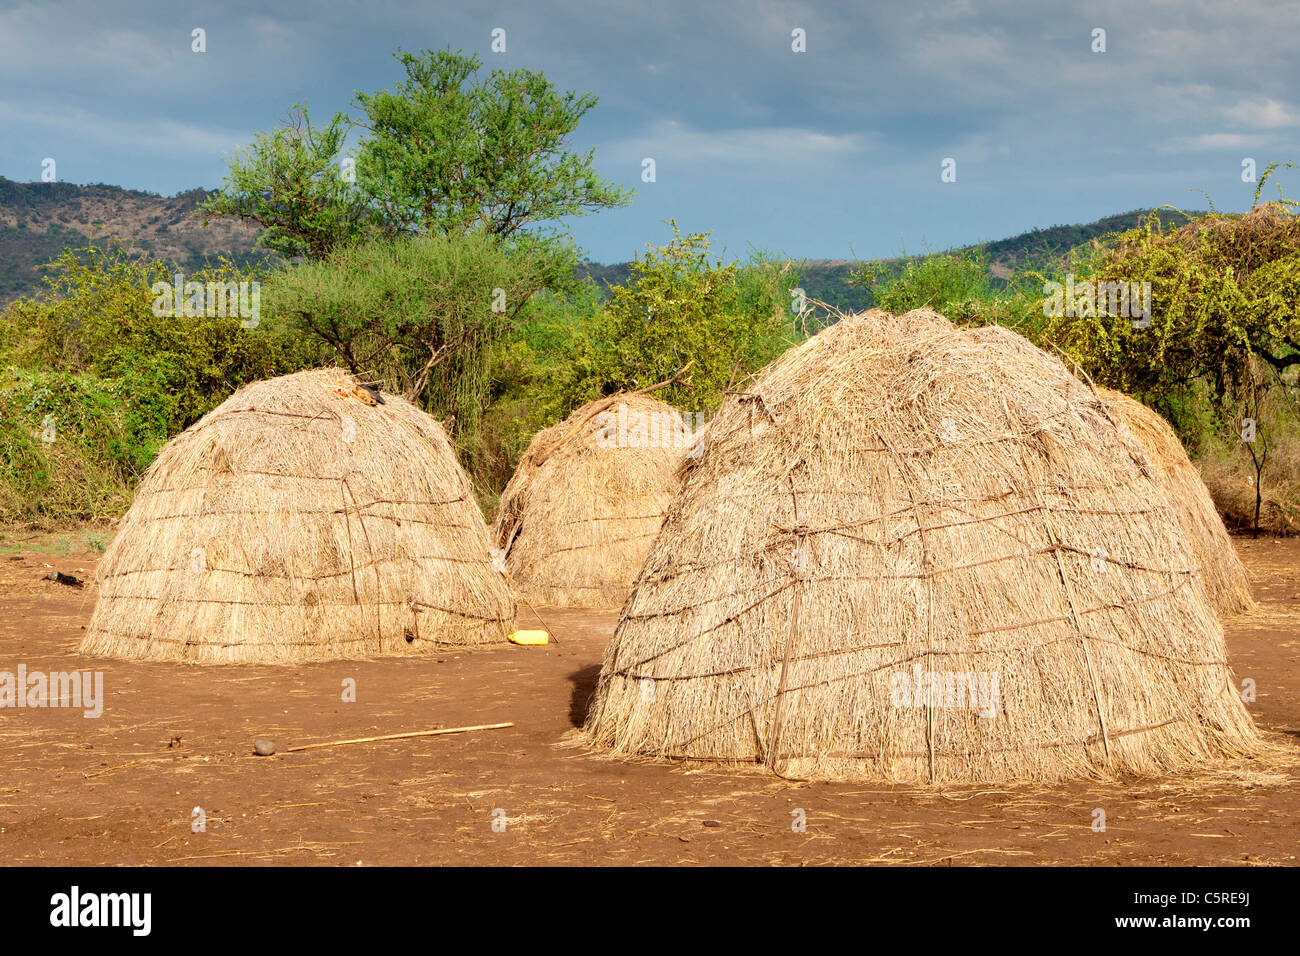 A traditional Mursi tribal village in Mago National Park in the Lower Omo Valley, Southern Ethiopia, Africa. Stock Photo